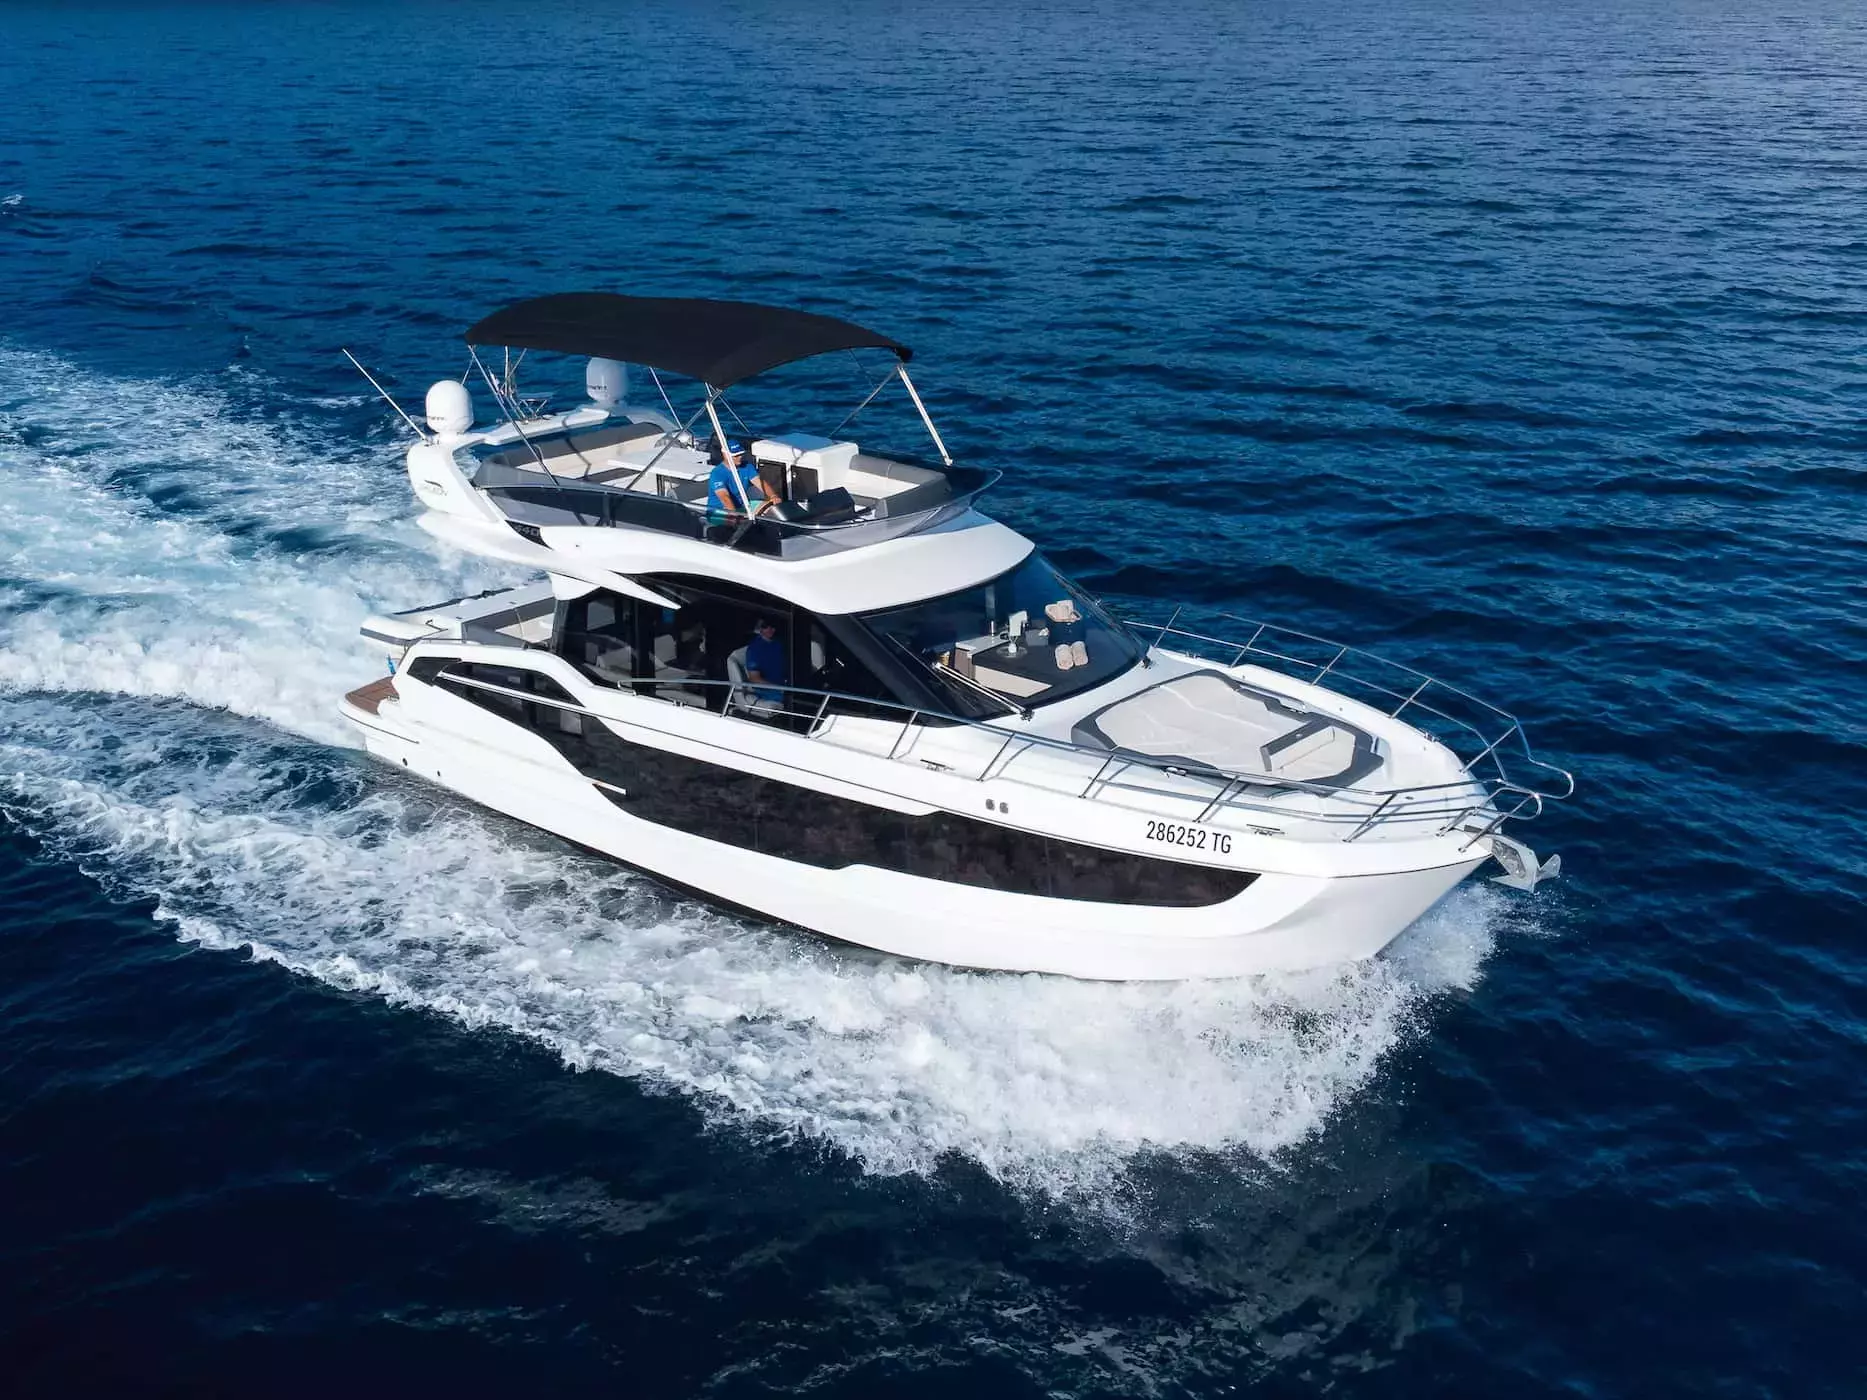 FG Star mini by Galeon - Top rates for a Charter of a private Motor Yacht in Montenegro